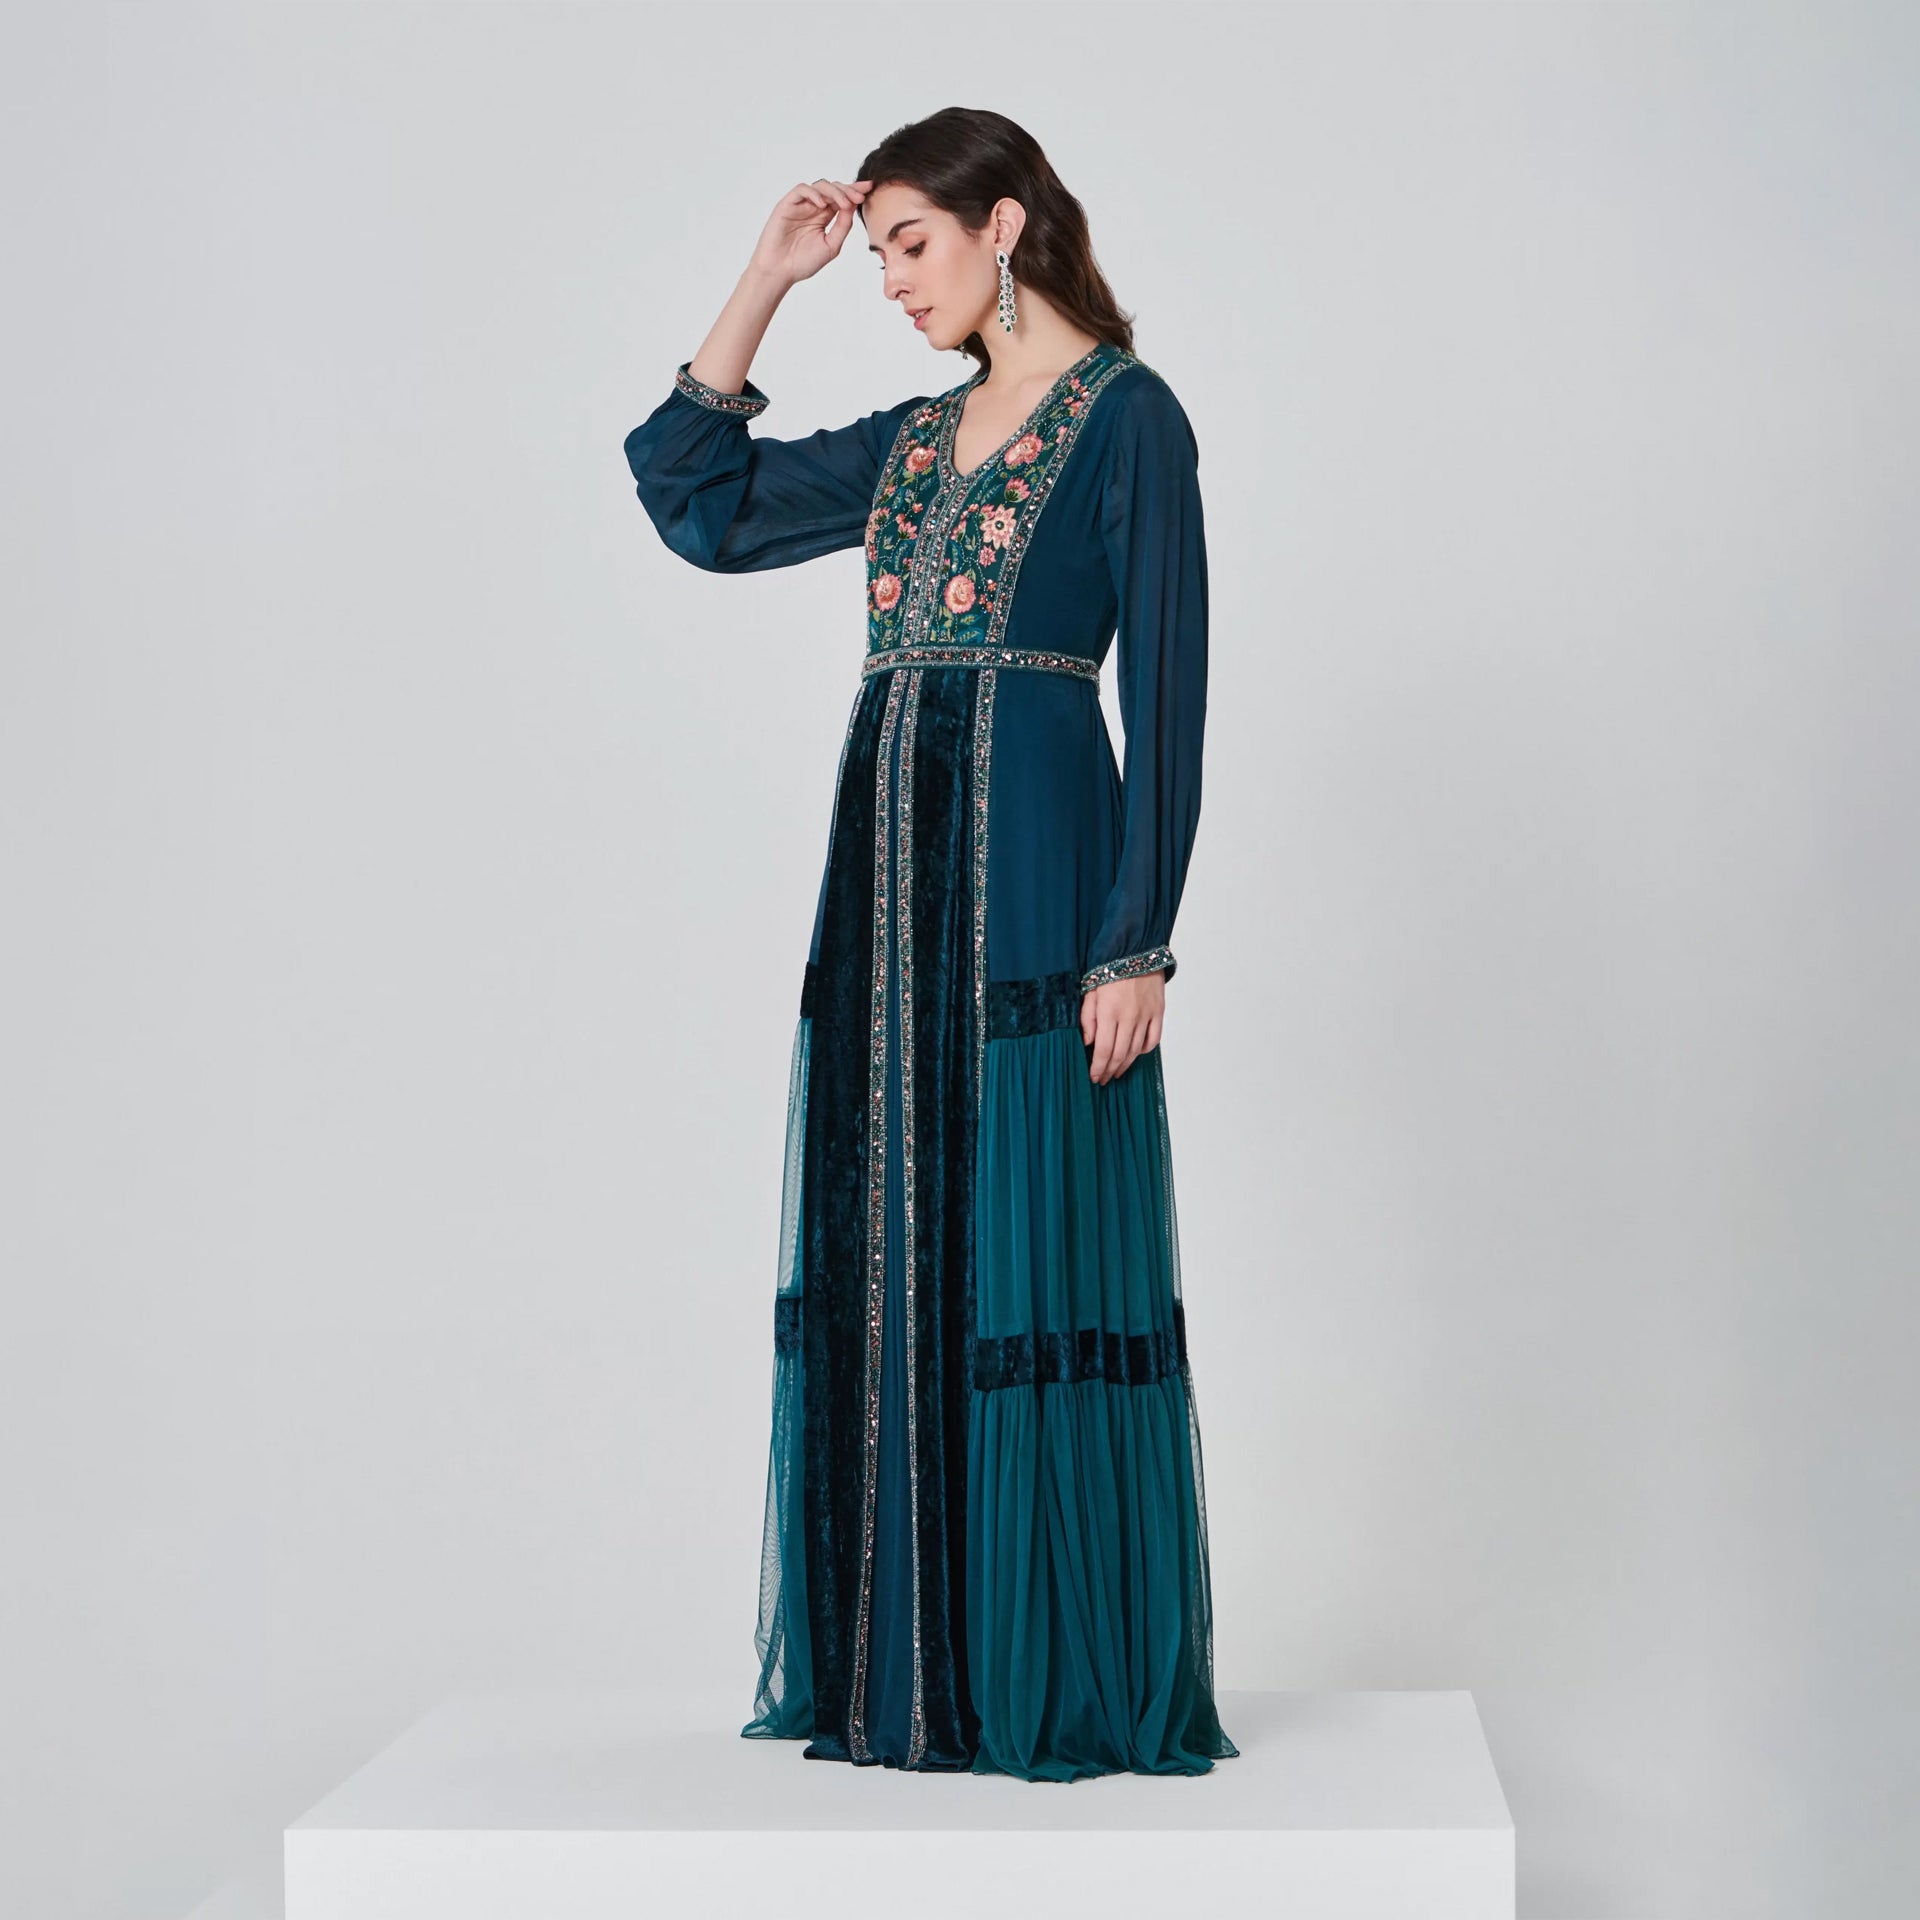 Petrol Crepe and Chiffon Embroidery Katrina Dress with Long Sleeves From Shalky